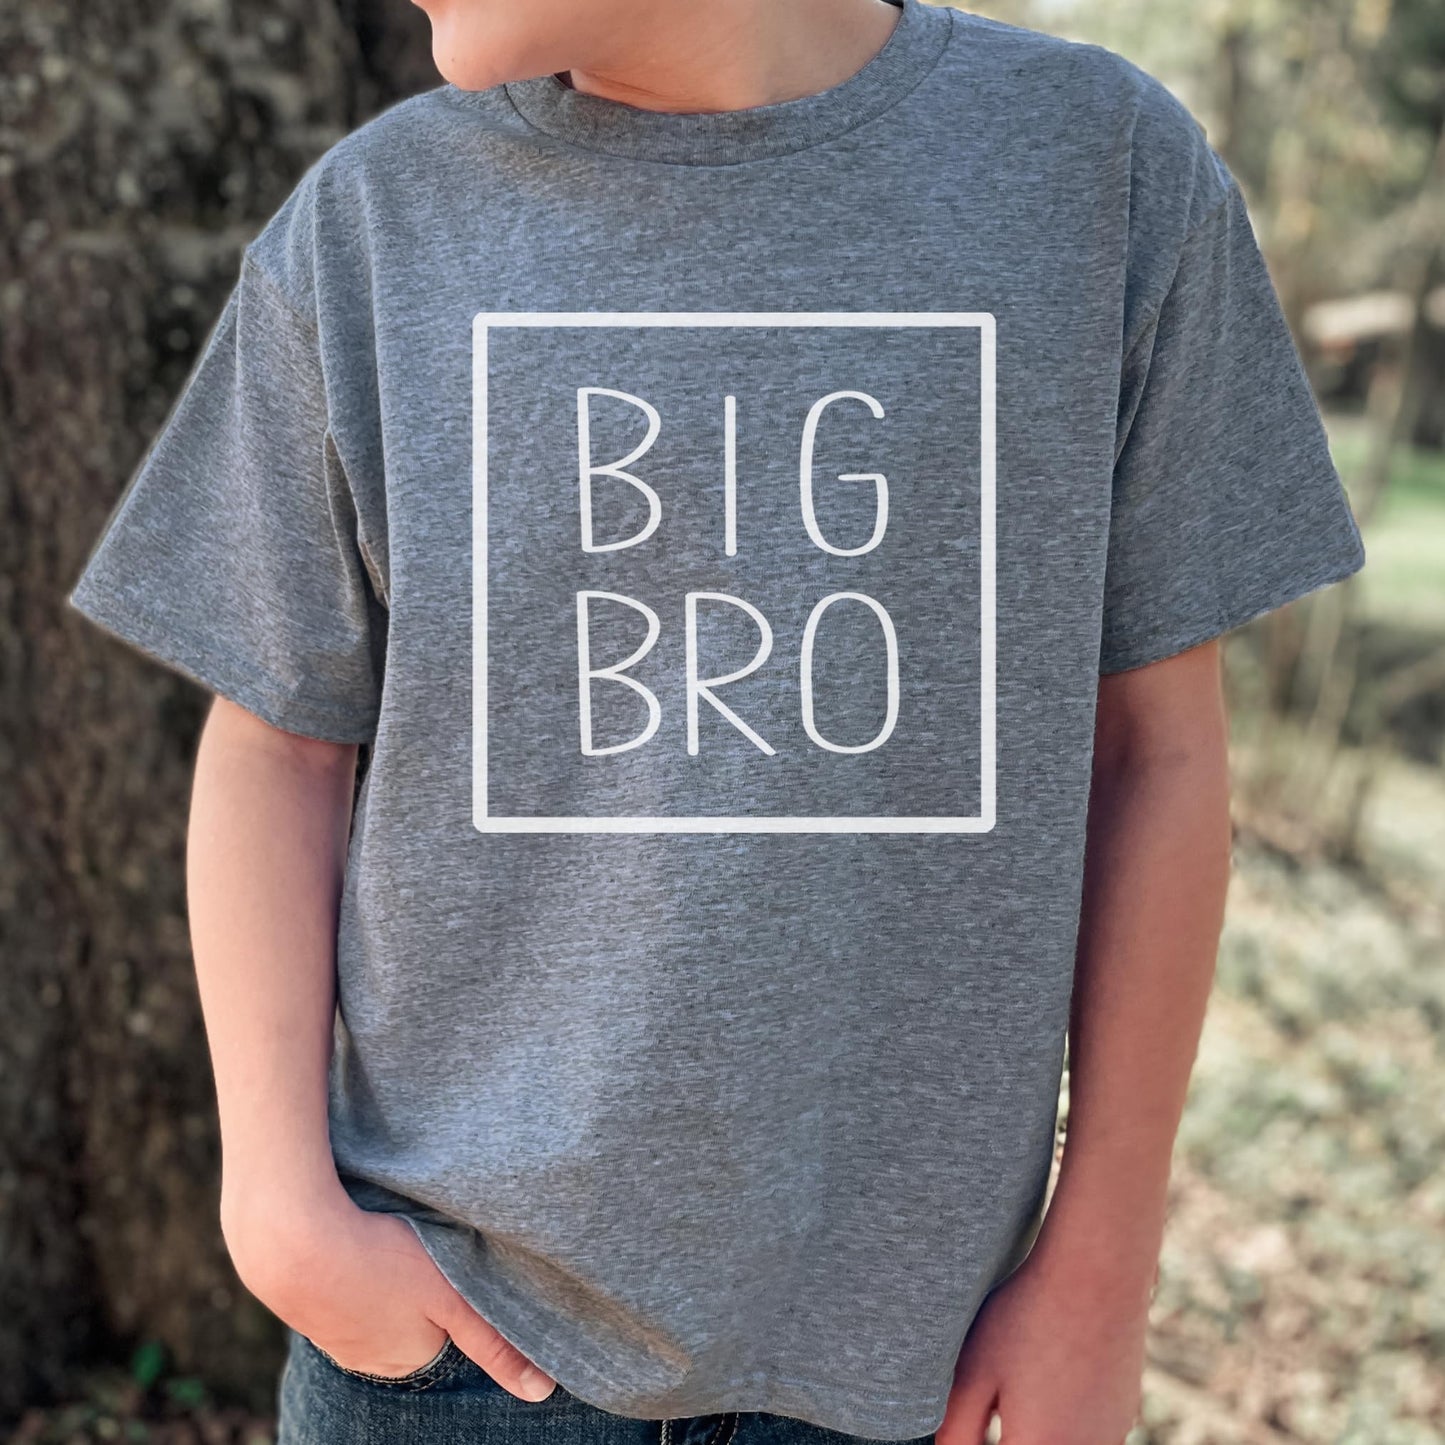 Big Bro Square Sibling Reveal Announcement Shirt for Boys Big Brother Sibling Outfit